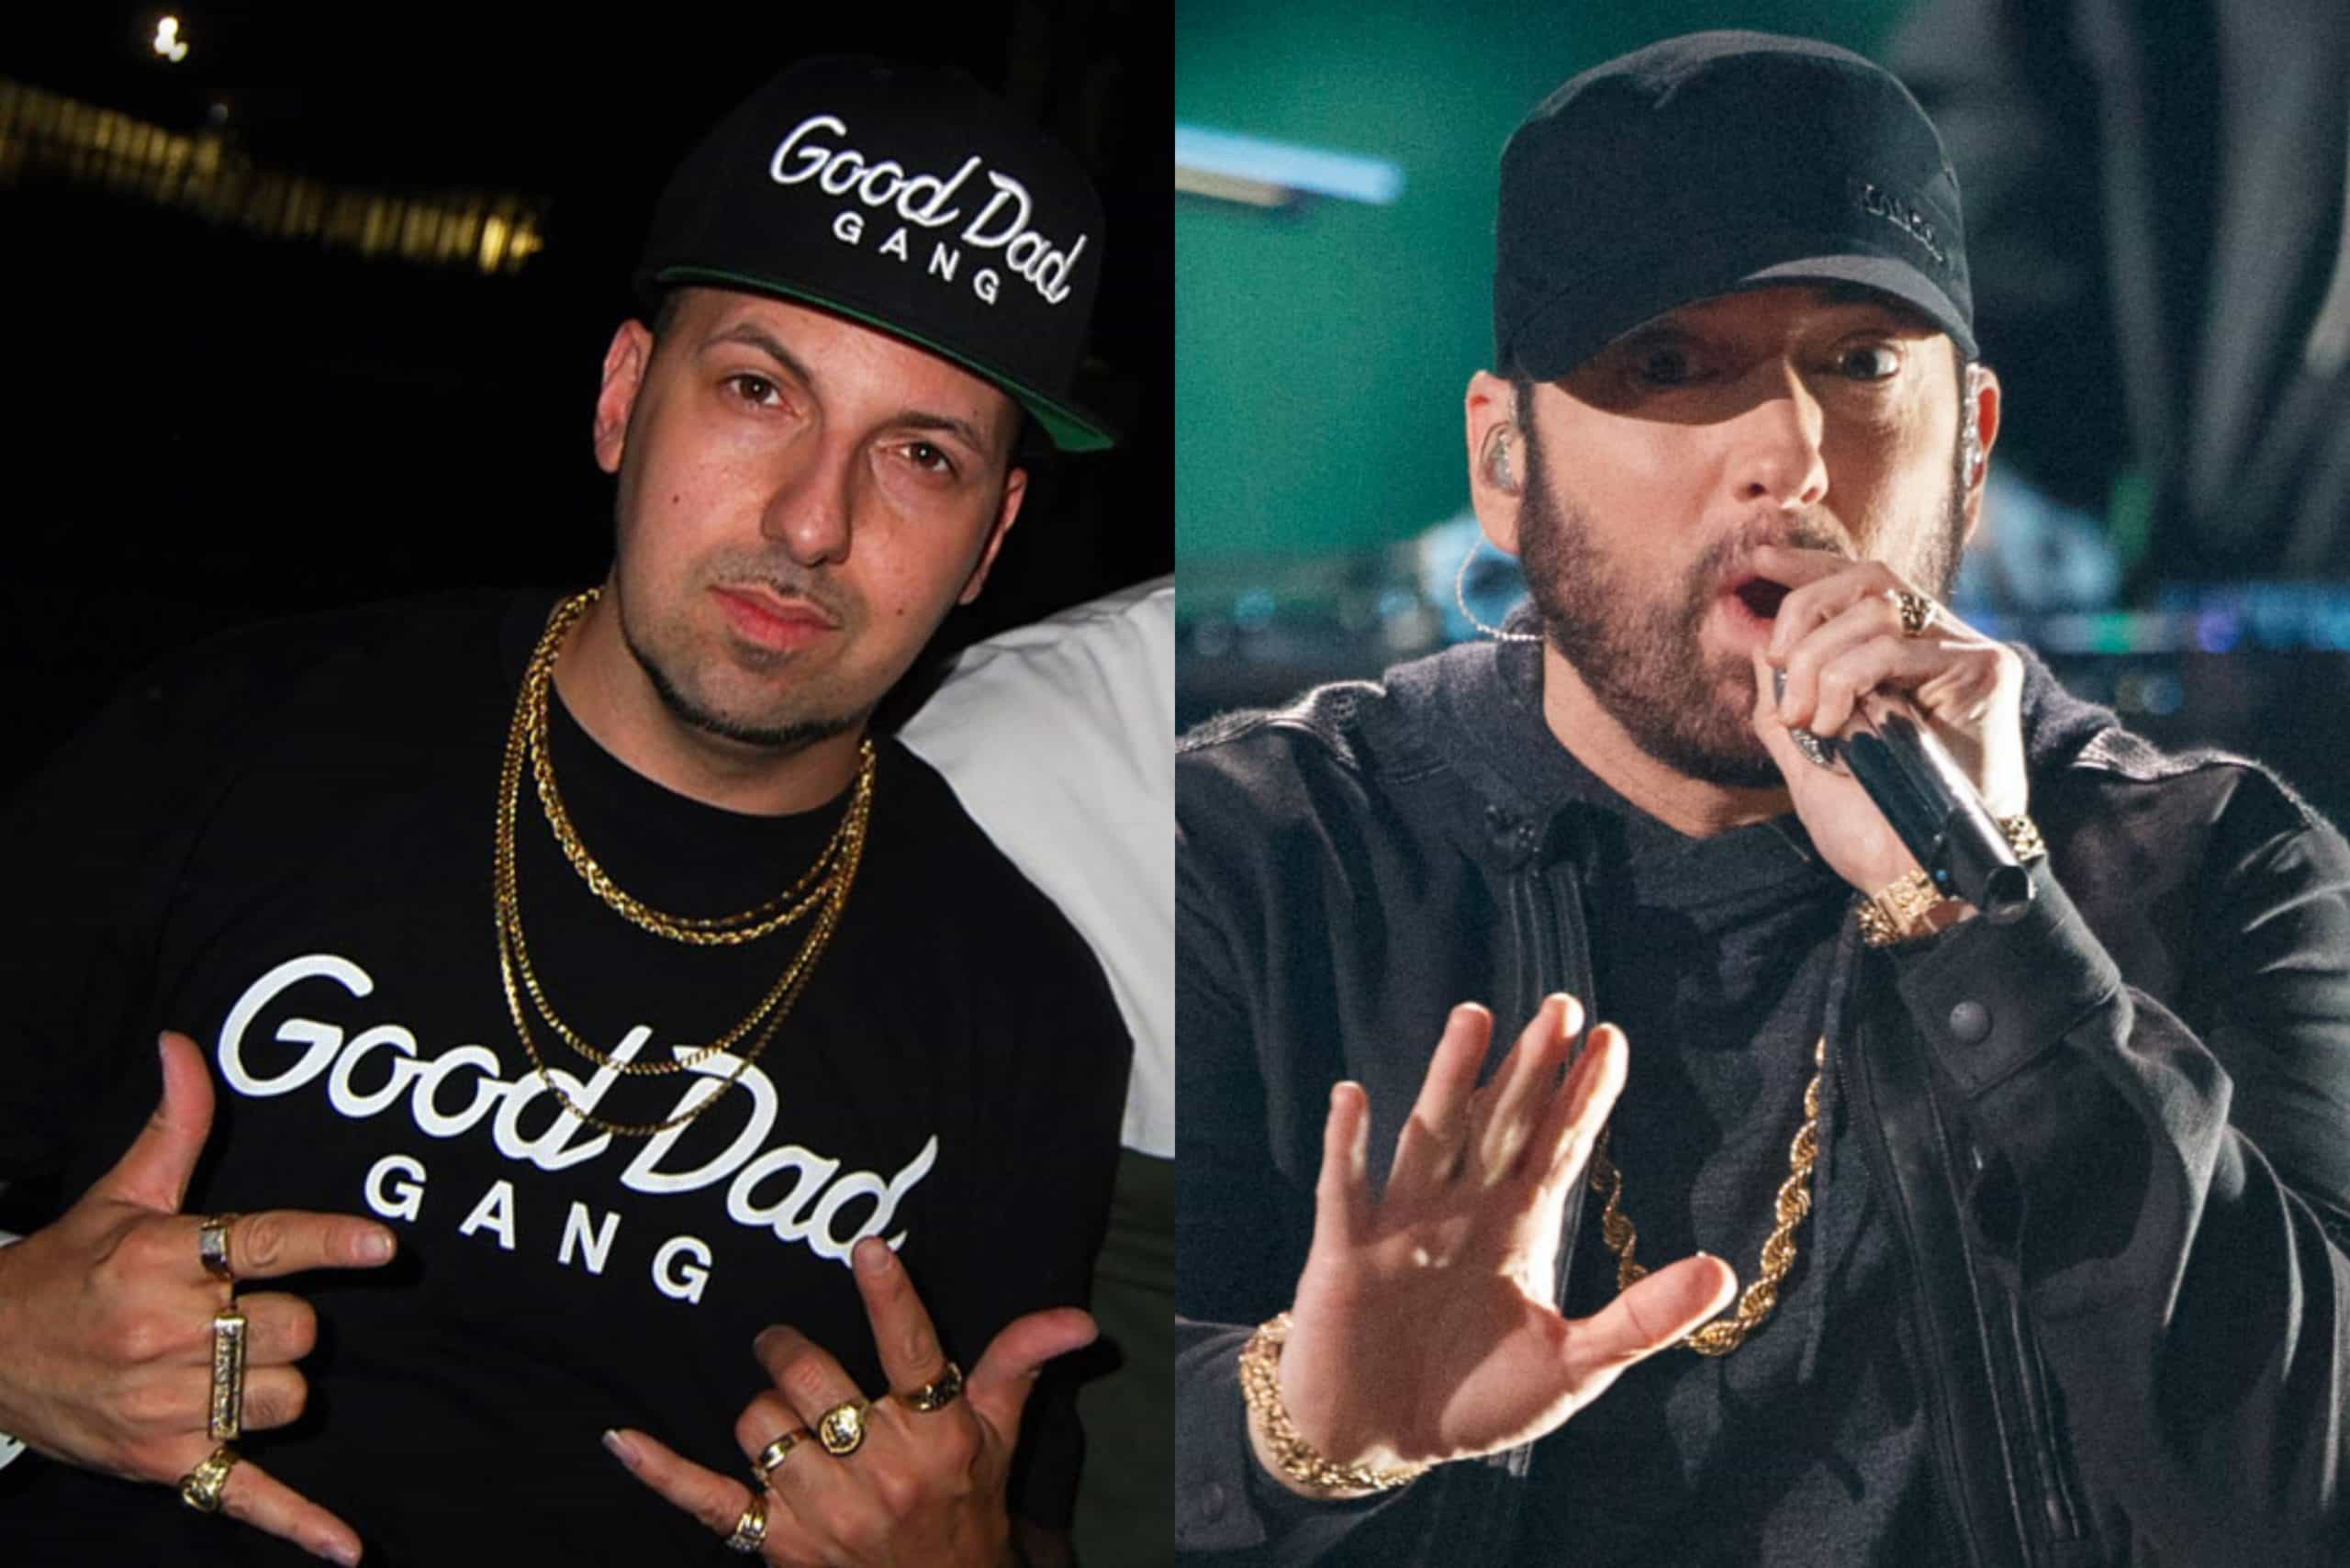 Termanology Names Eminem's Third Godzilla Verse As The Best in 2020